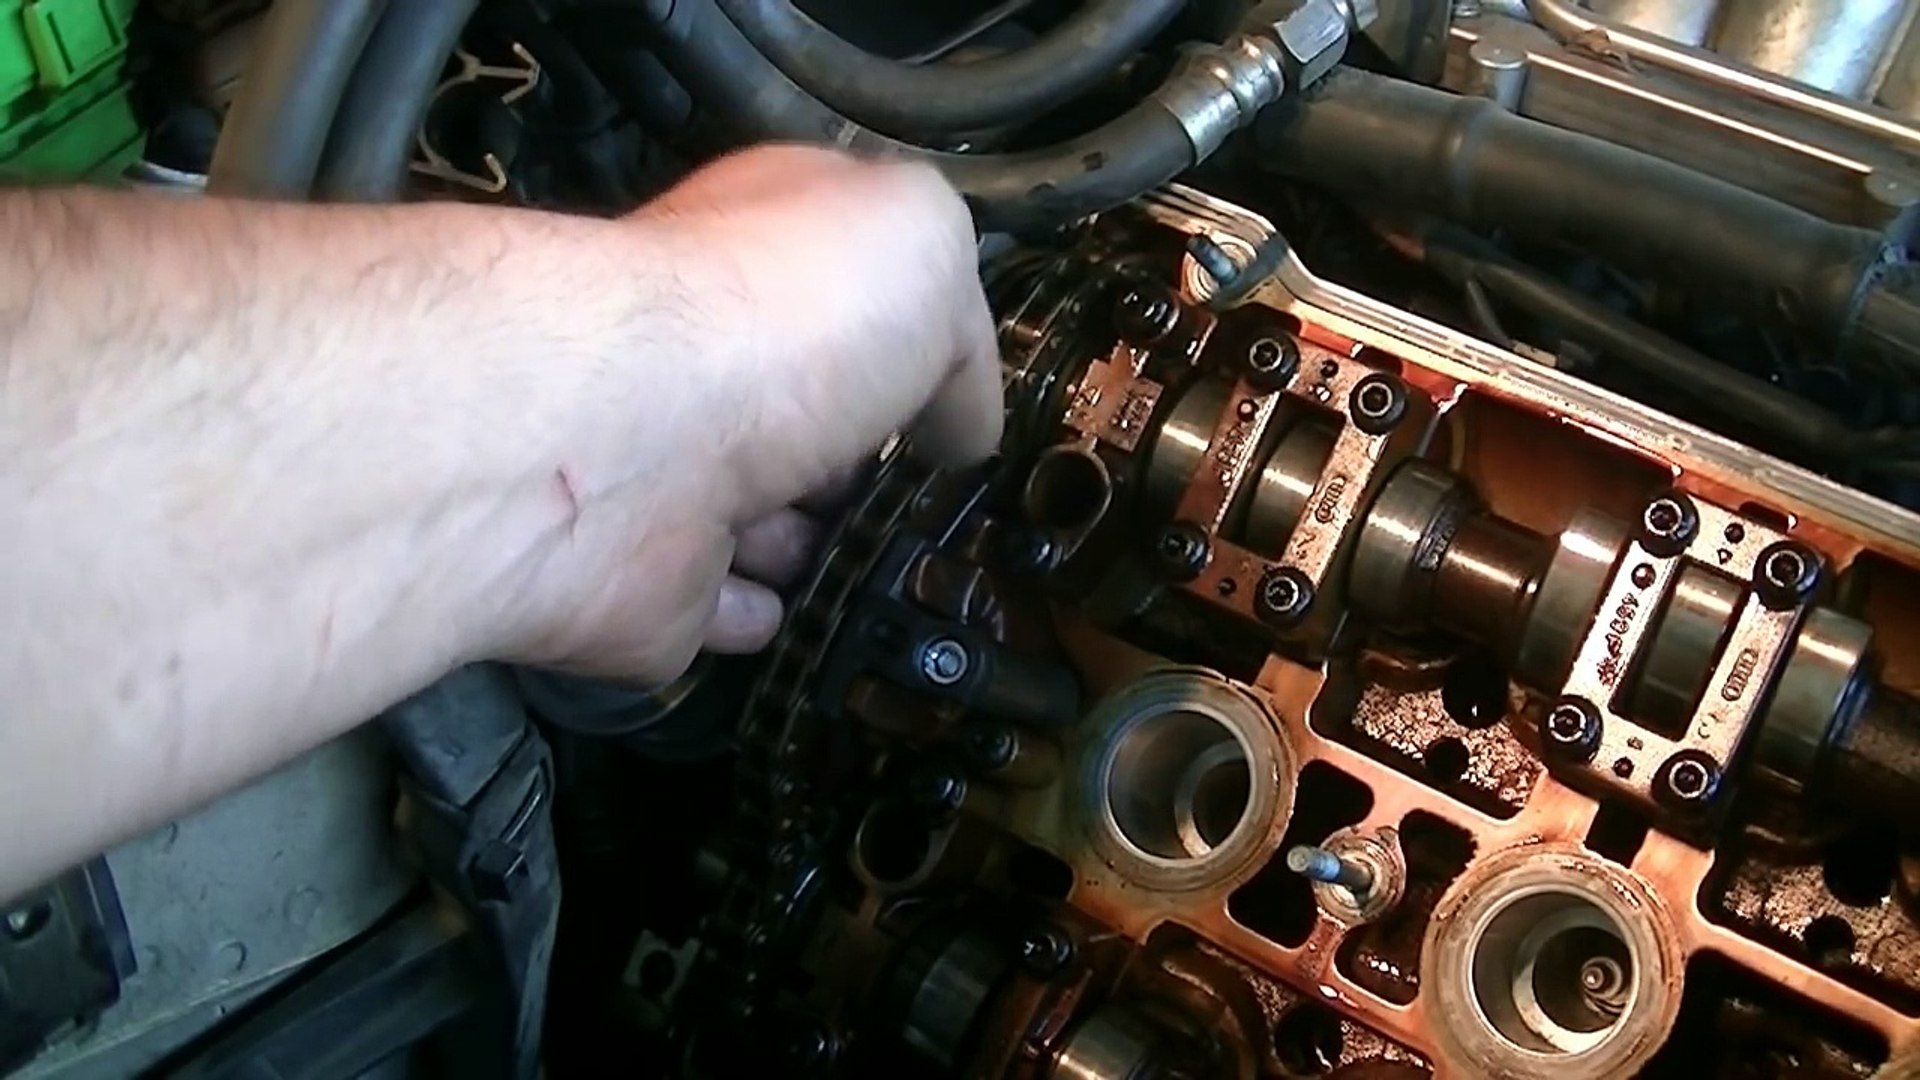 VW AUDI Camshaft Chain Tensioner Gasket and Half Moon Seal Replacement Part  2 – Видео Dailymotion